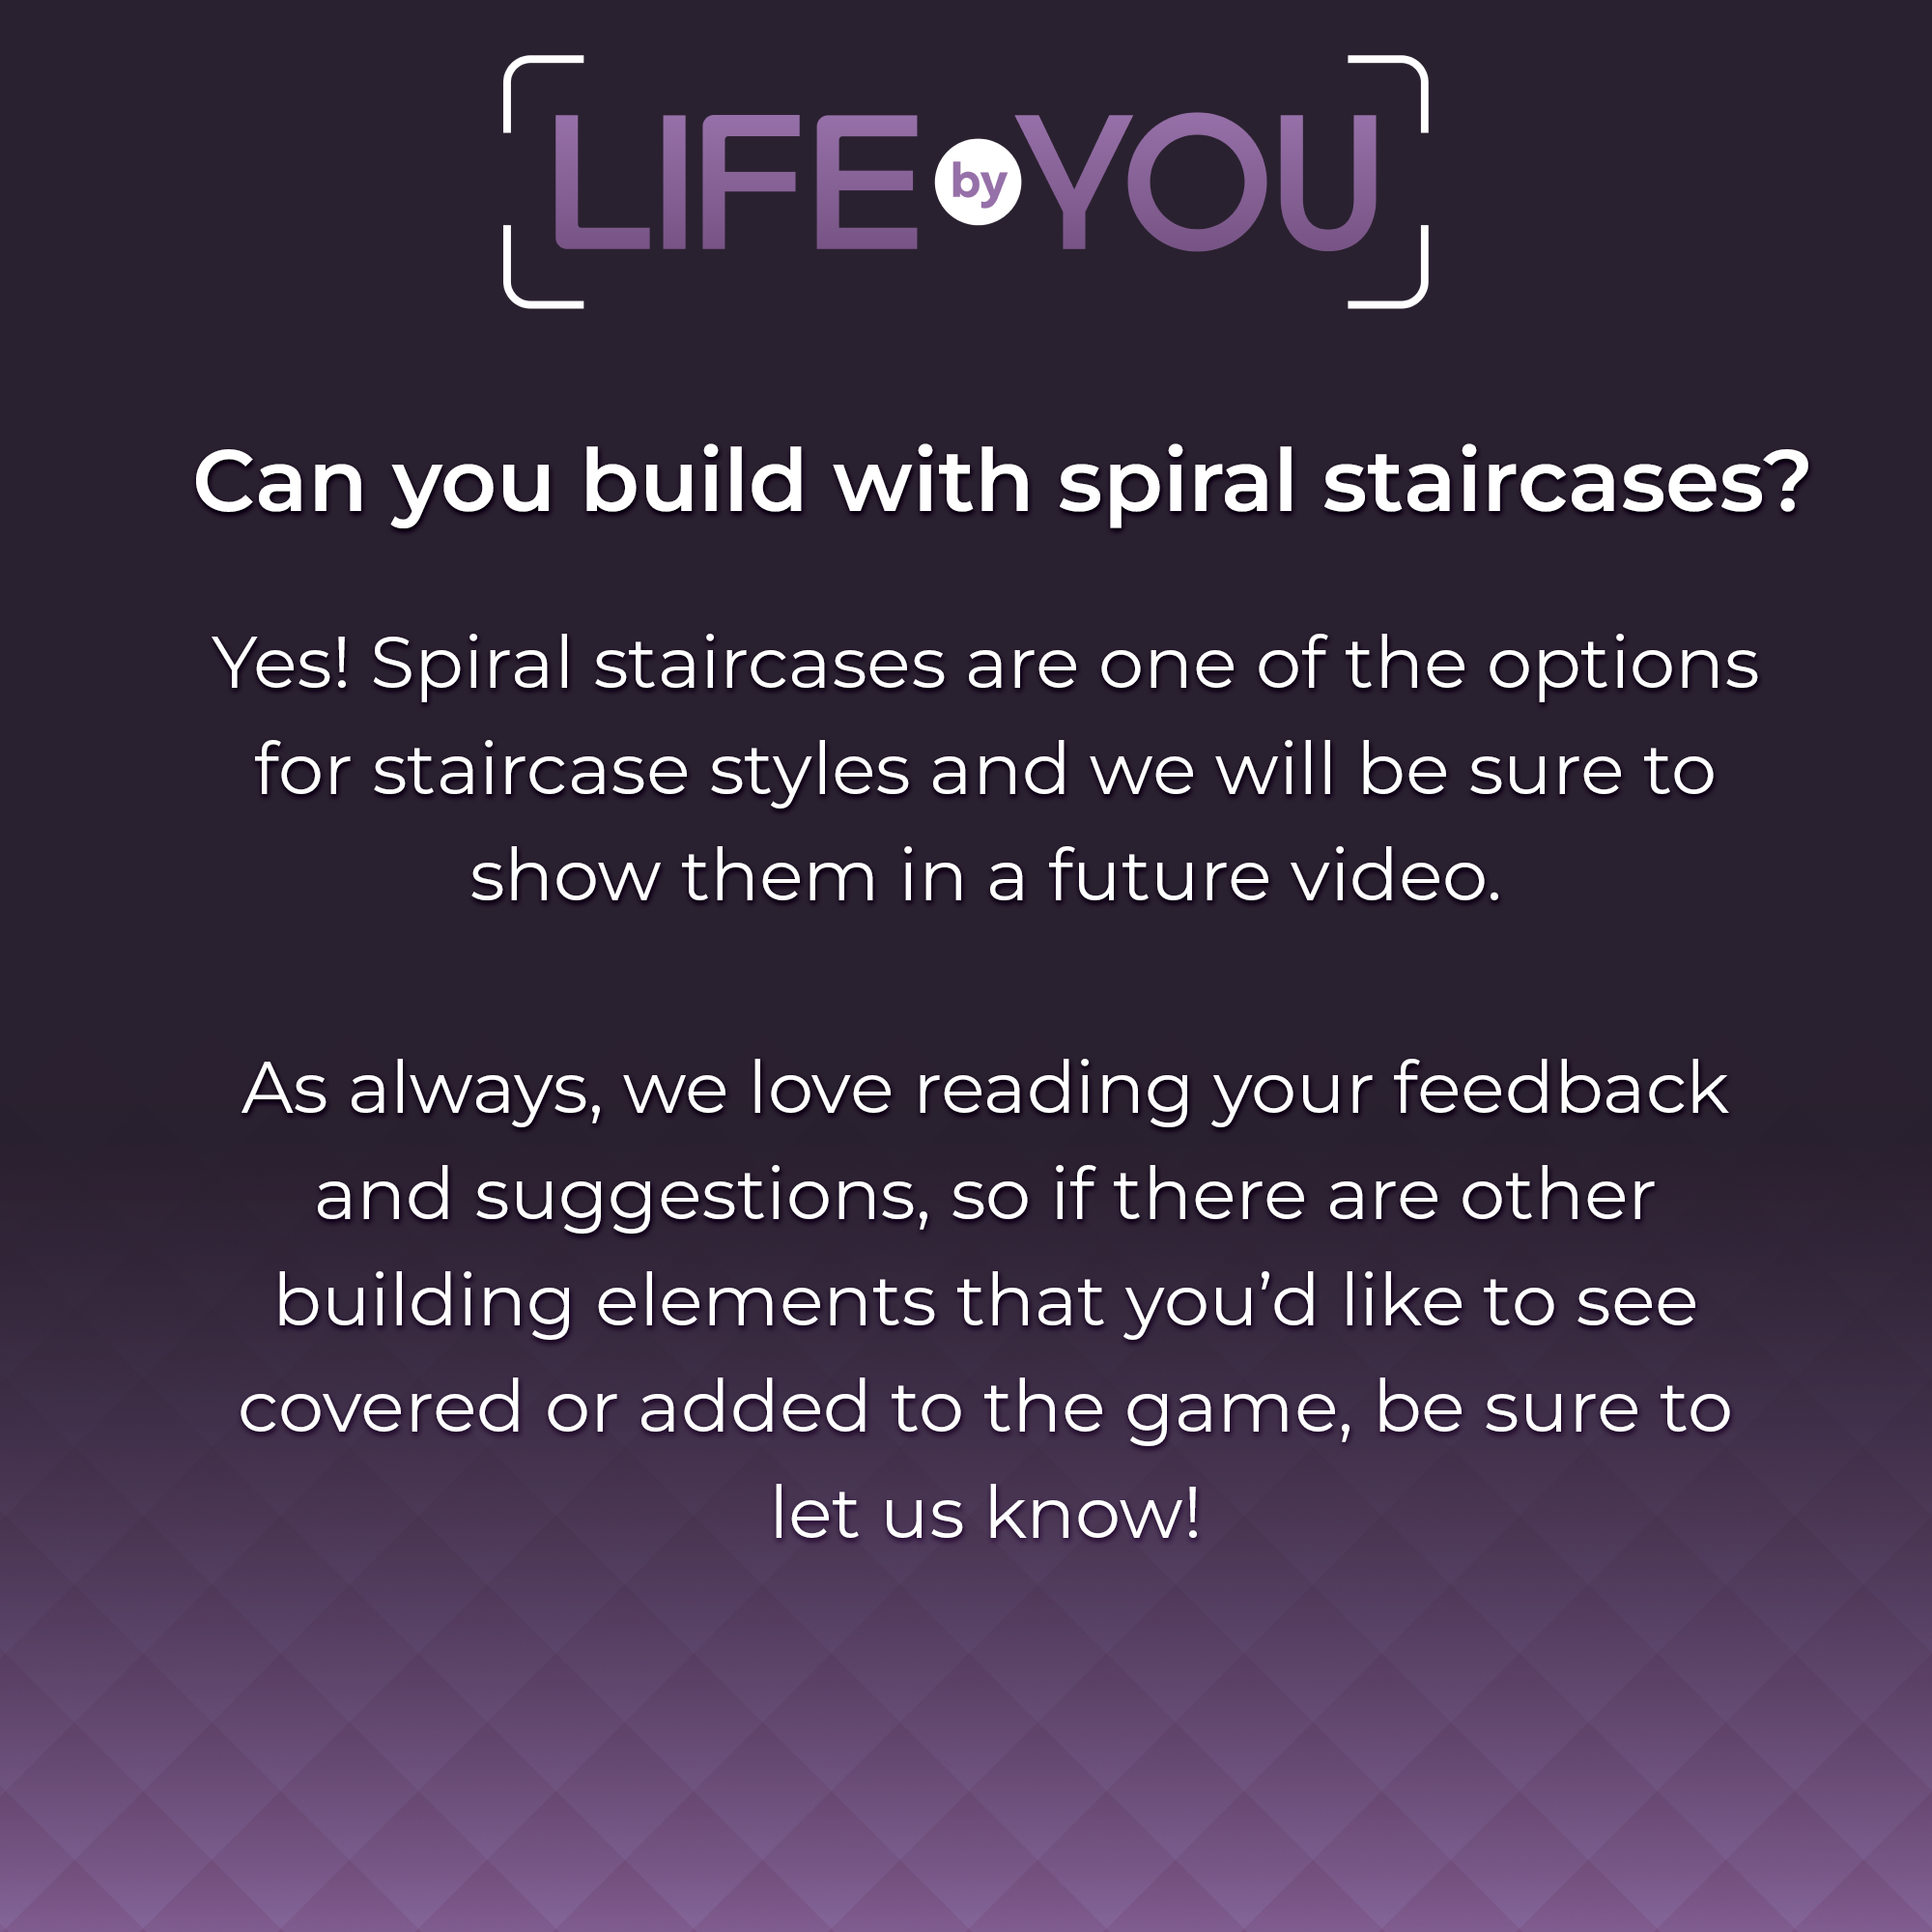 QnA Can you build with spiral staircases?